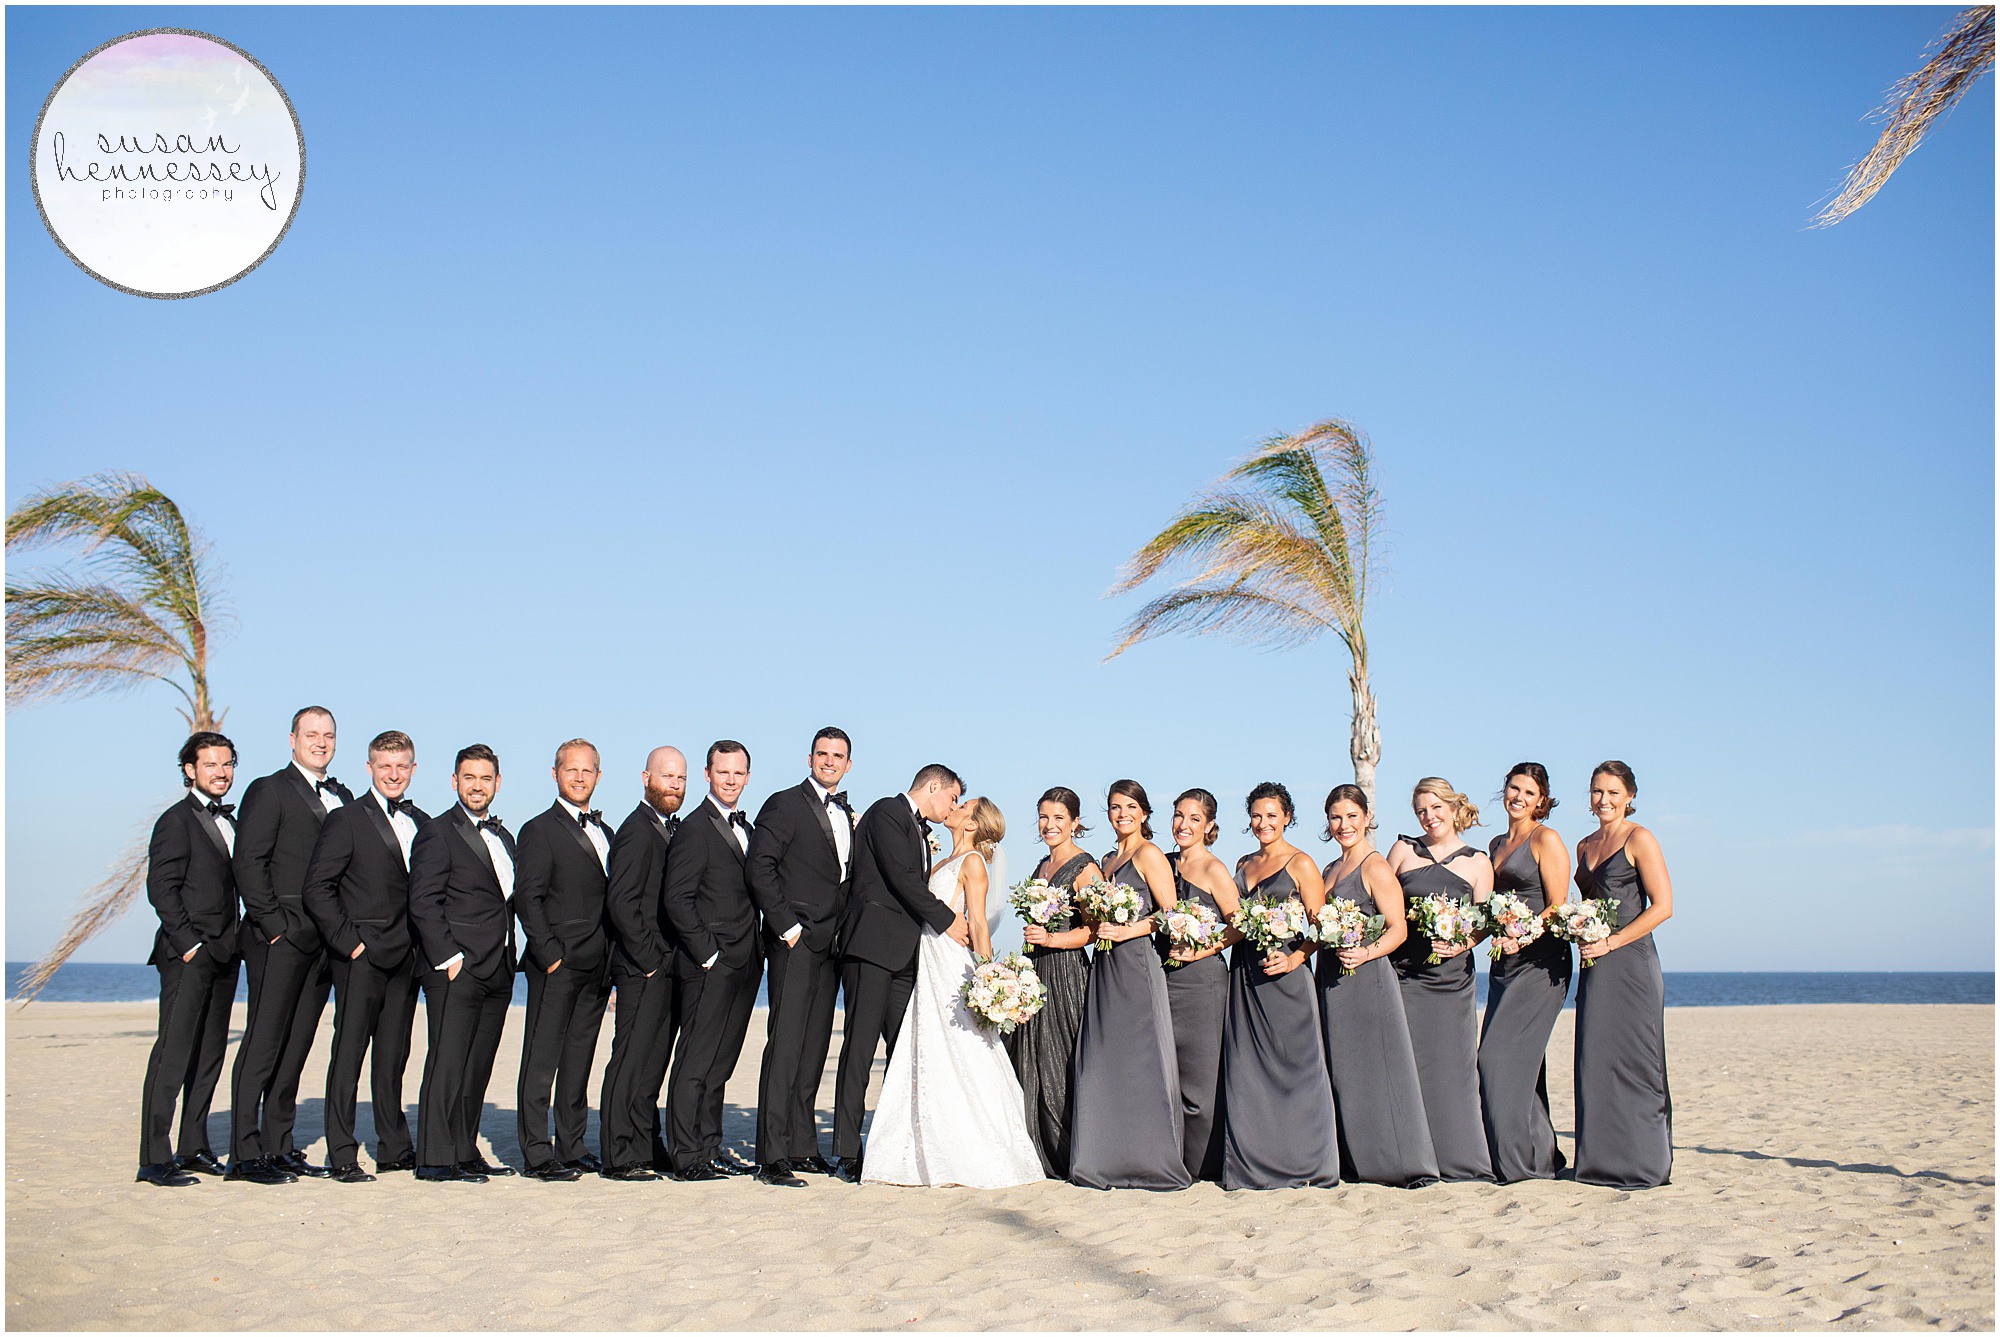 Bridal party on beach in front of ocean. 